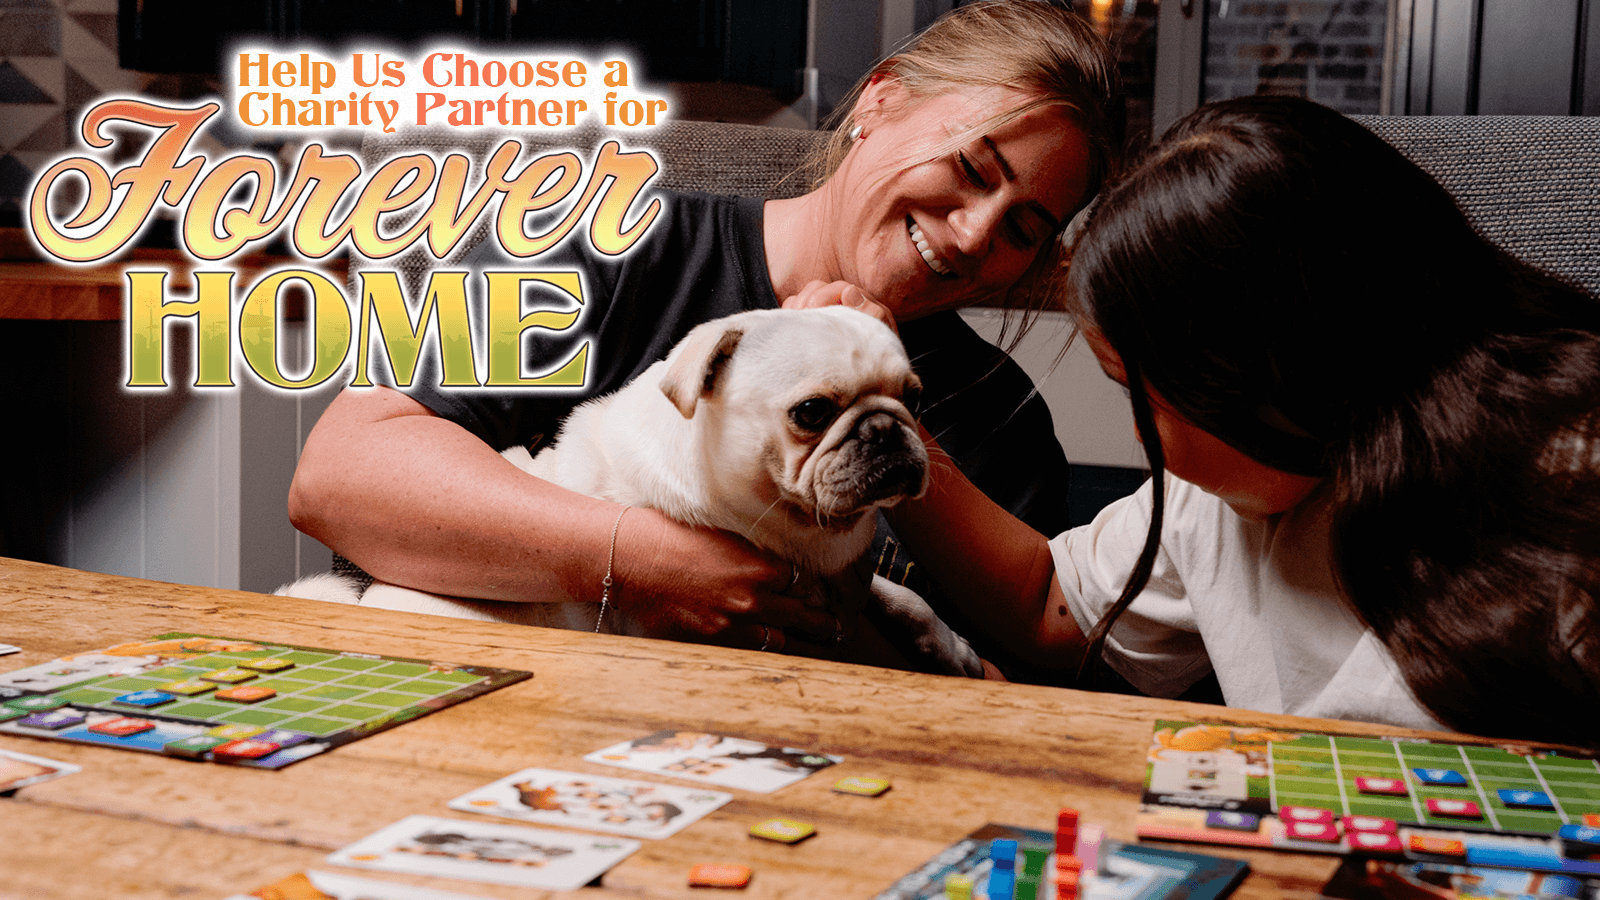 Help Birdwood Games Choose the Charity Partner for Forever Home